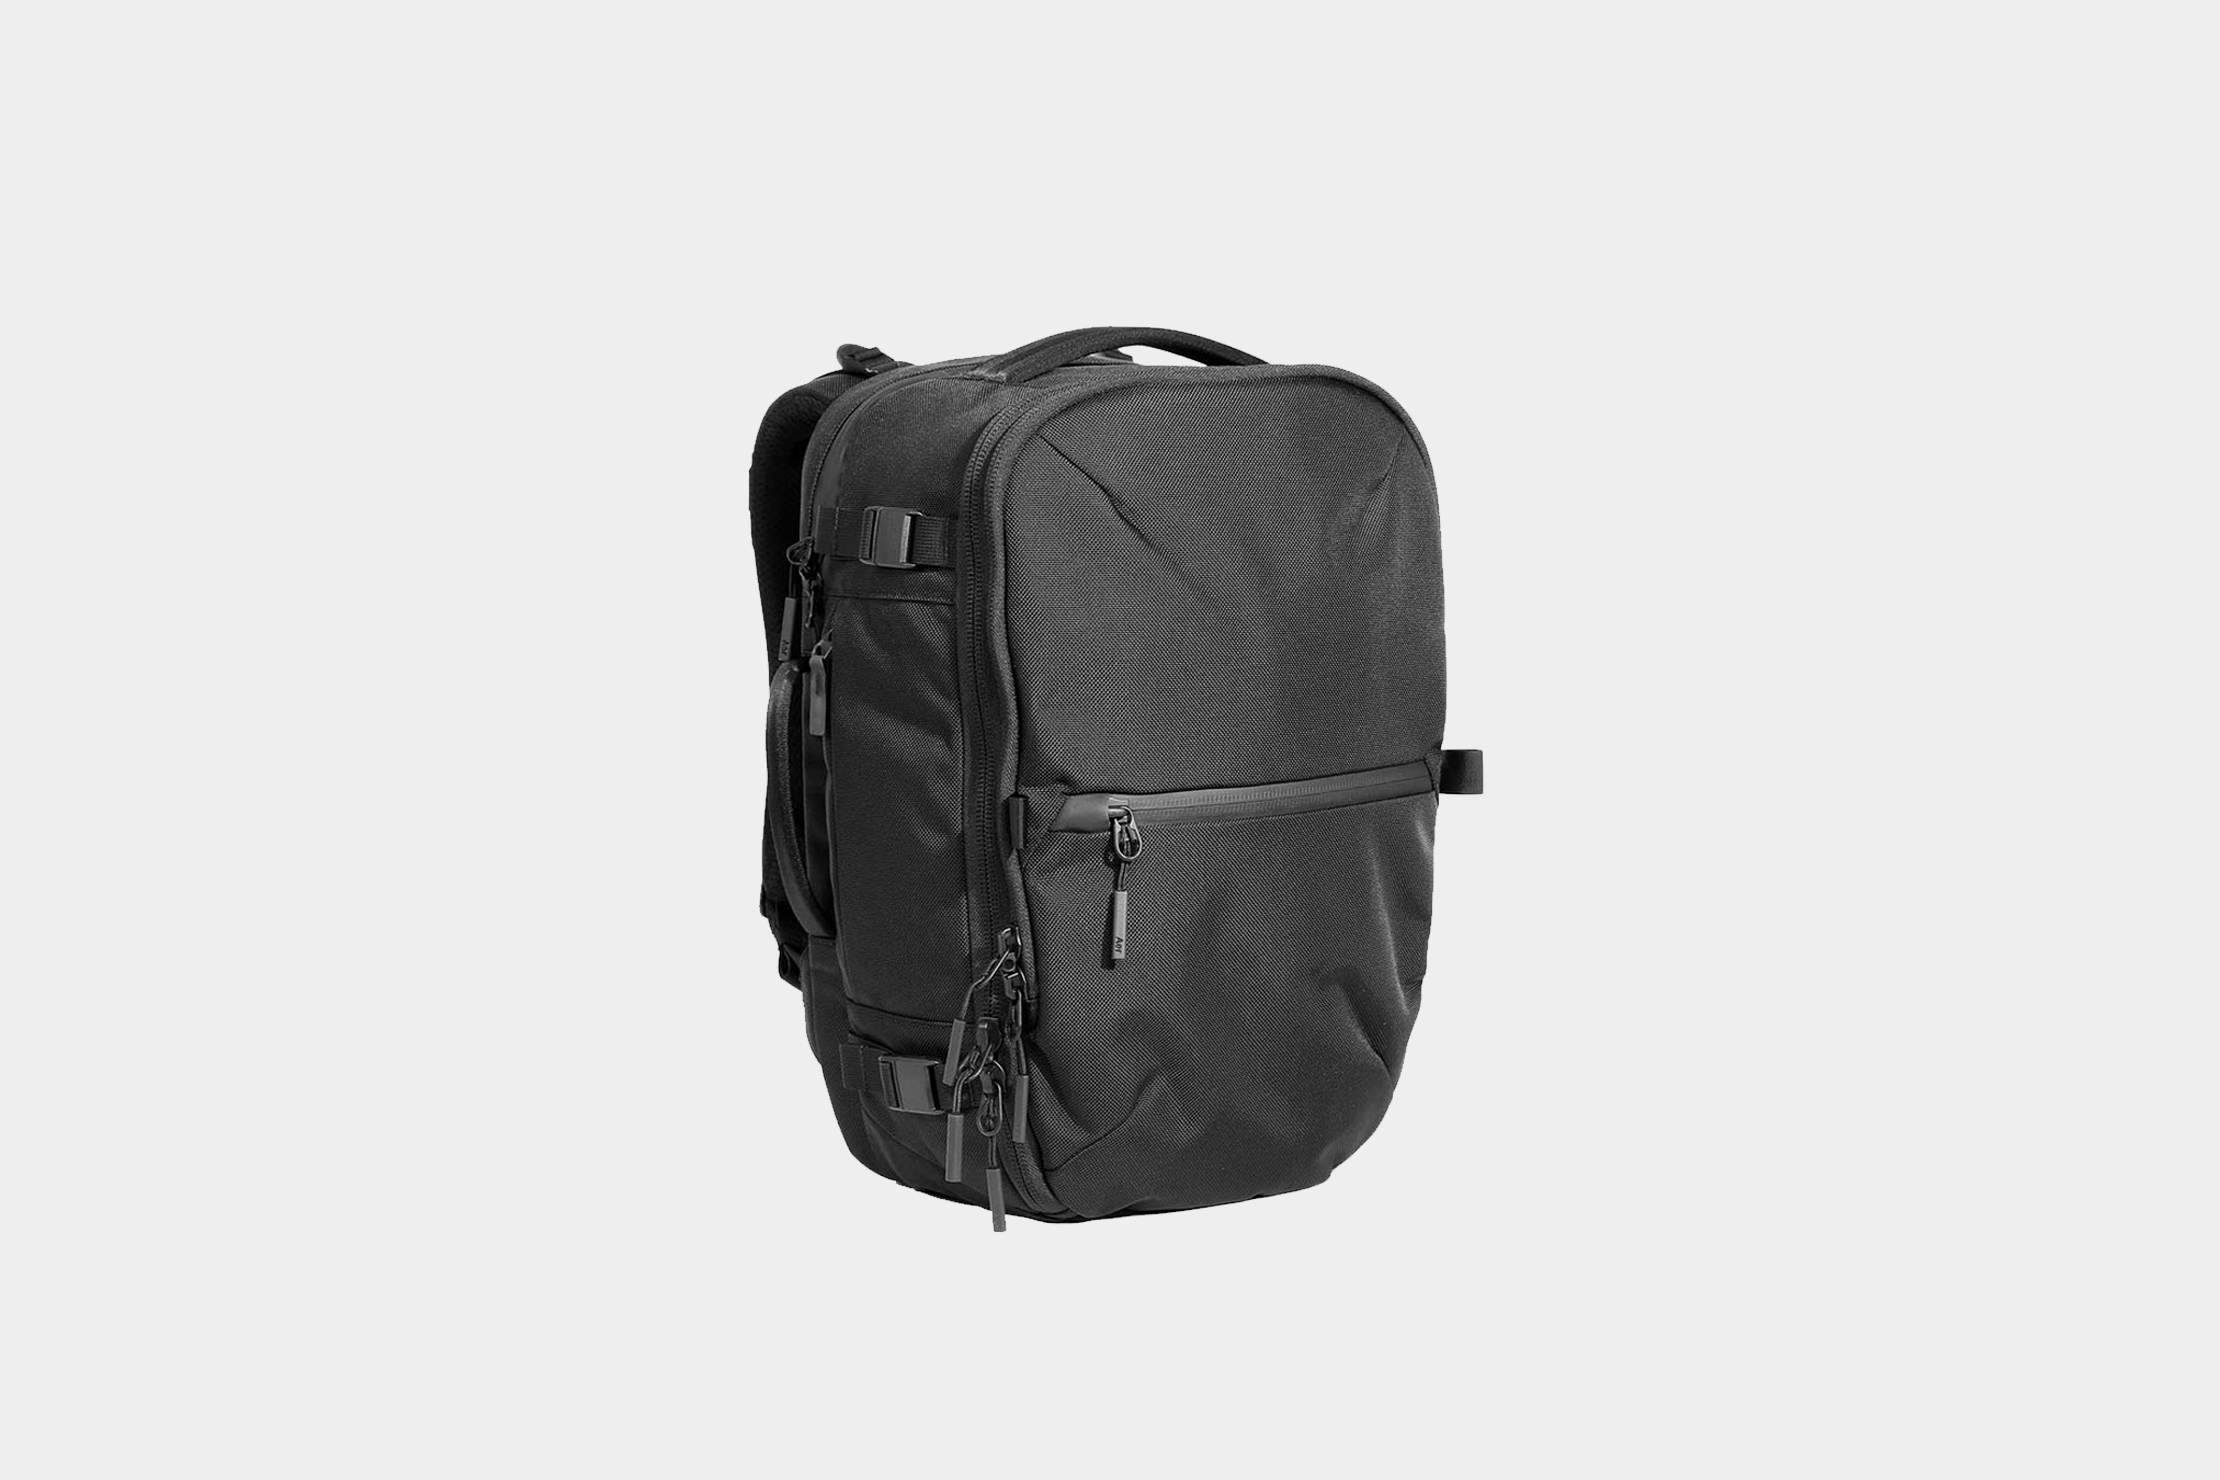 Aer Travel Pack 3 Small Review | Pack Hacker